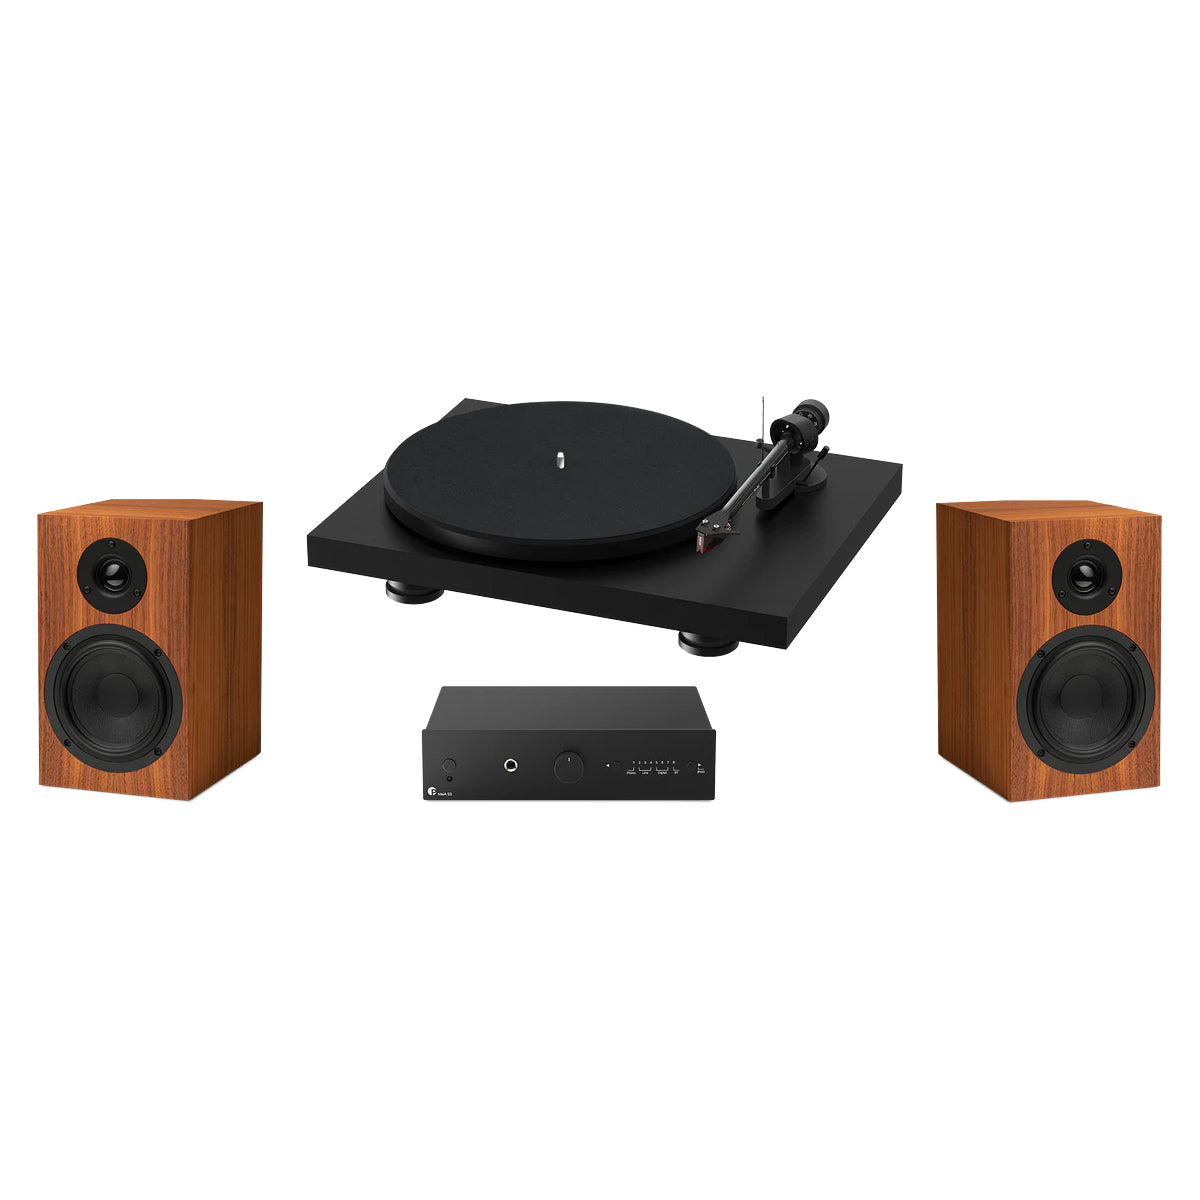 Pro-Ject Colorful Audio System - Black TT/Walnut Speakers - The Audio Experts